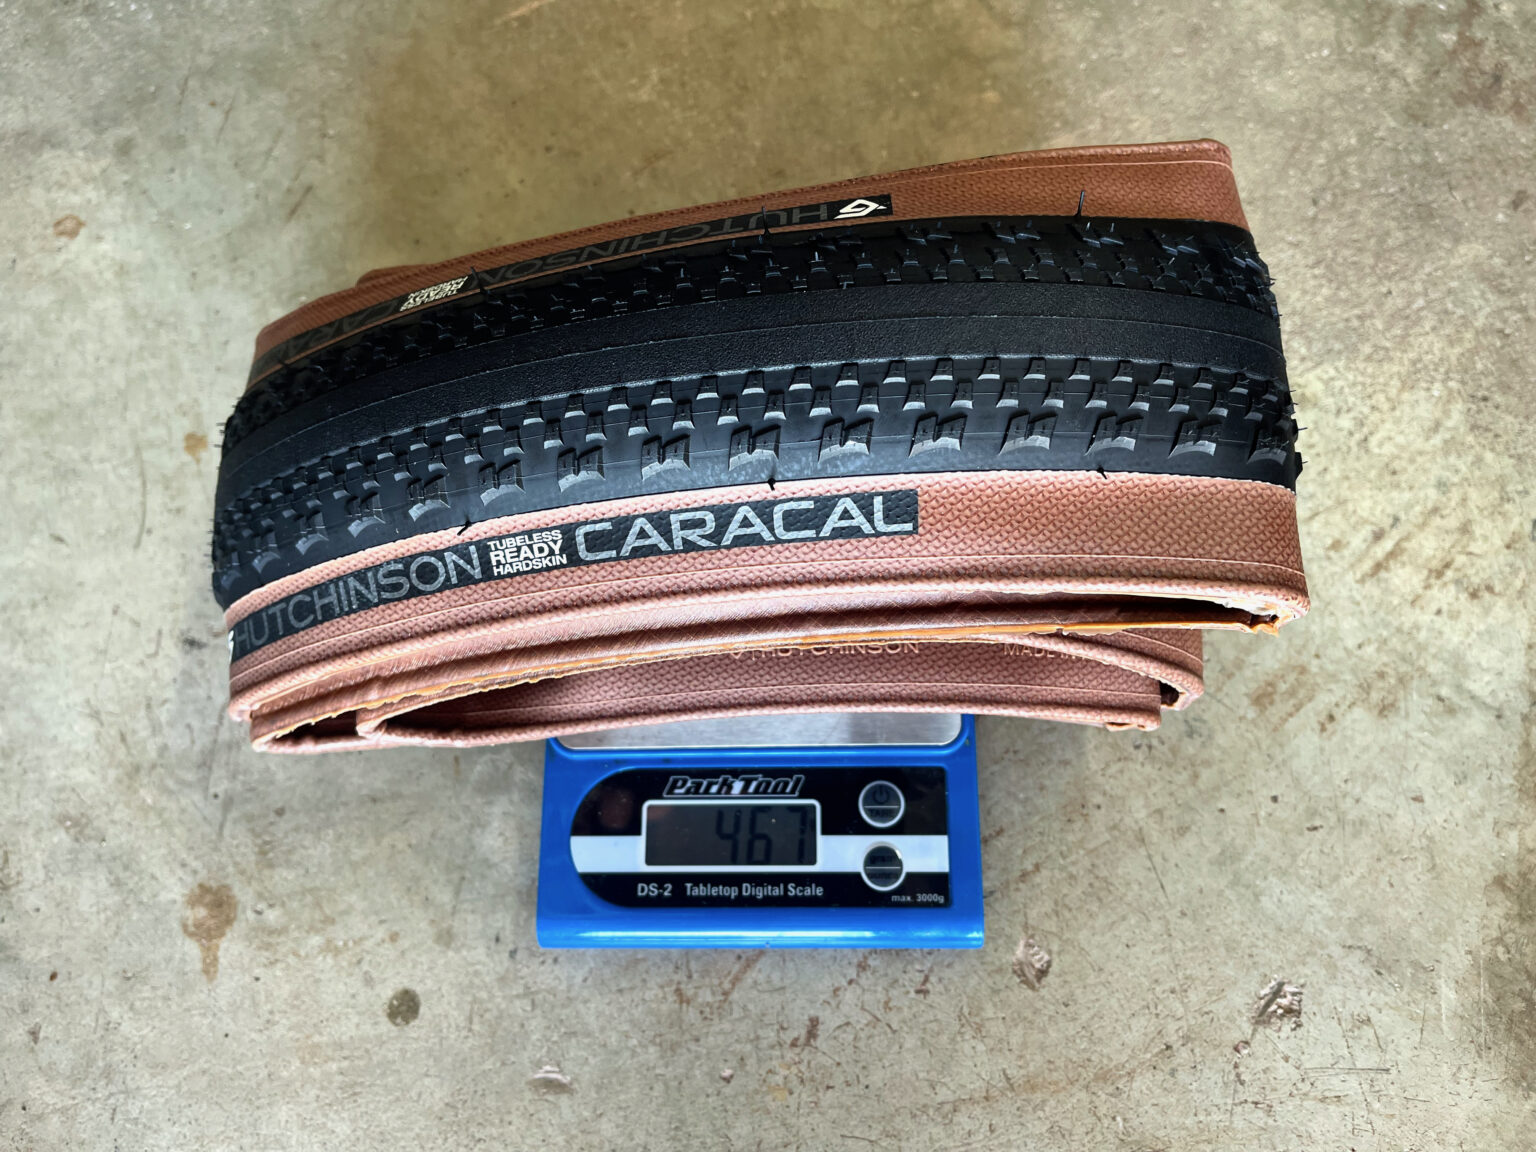 Hutchinson Caracal gravel tire weight